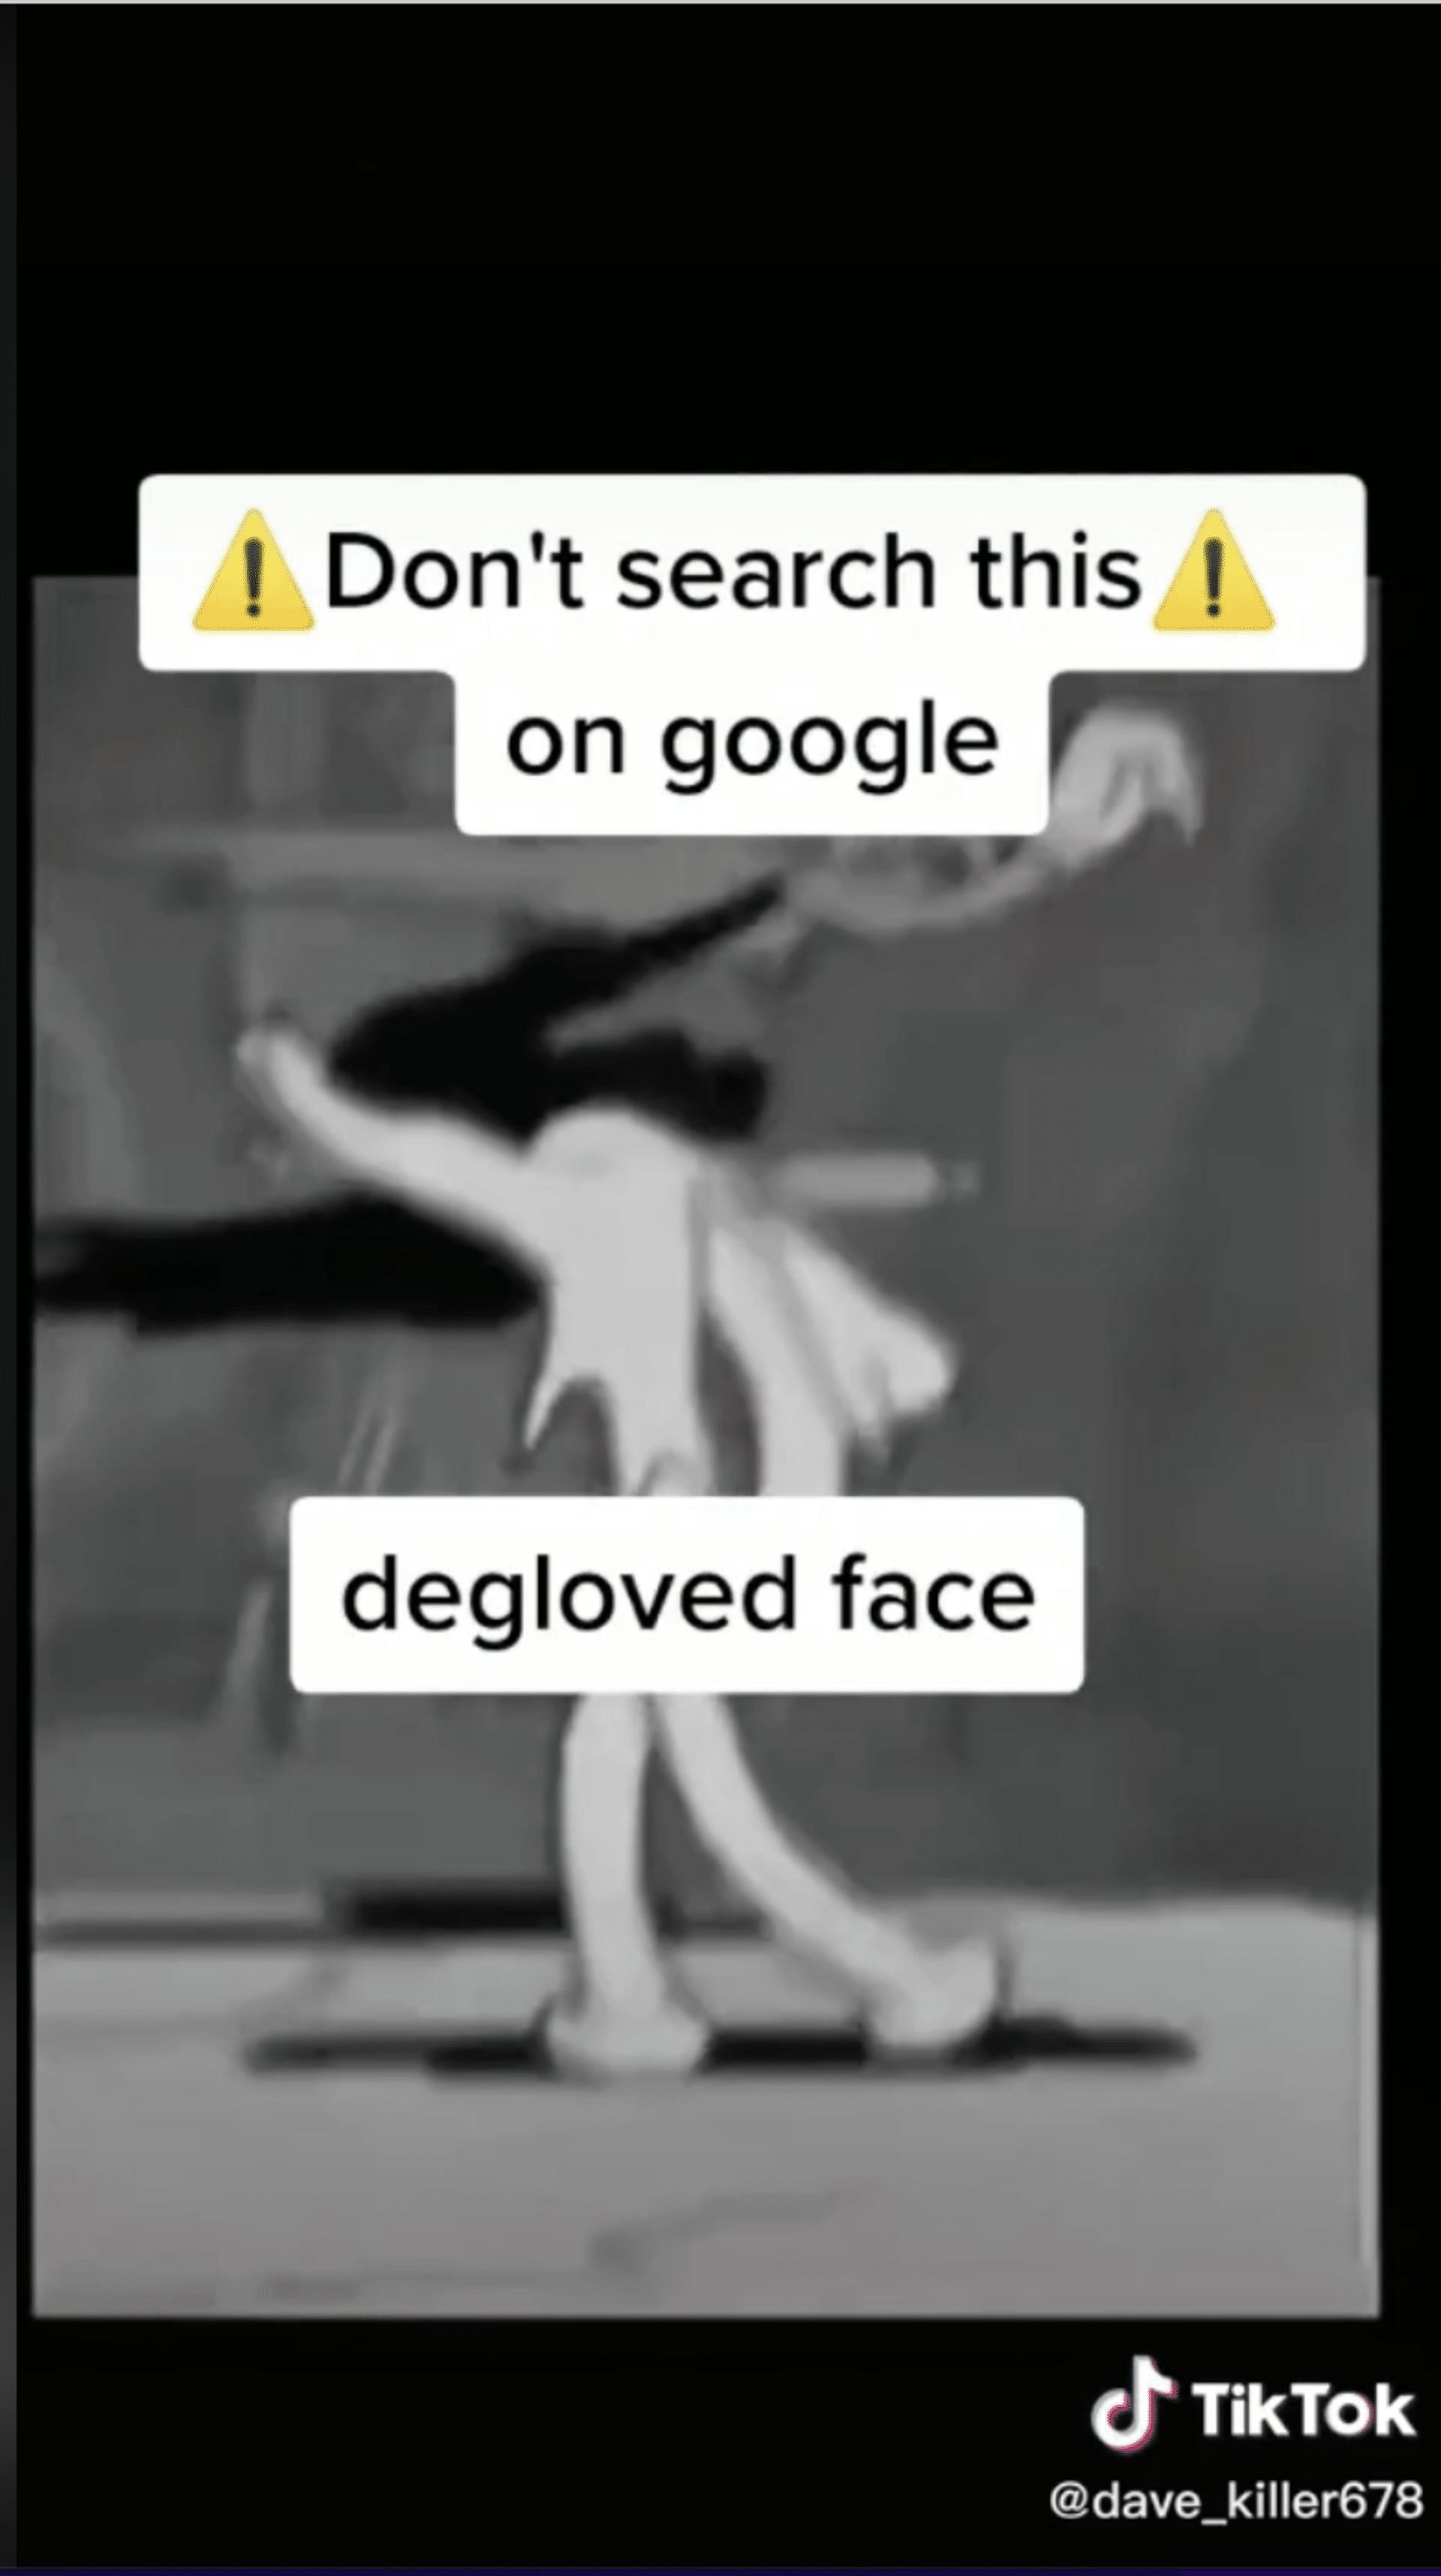 Social media users warn the netizens not to search for degloved face videos and images as some have found them to be super traumatizing. (Image via TikTok)